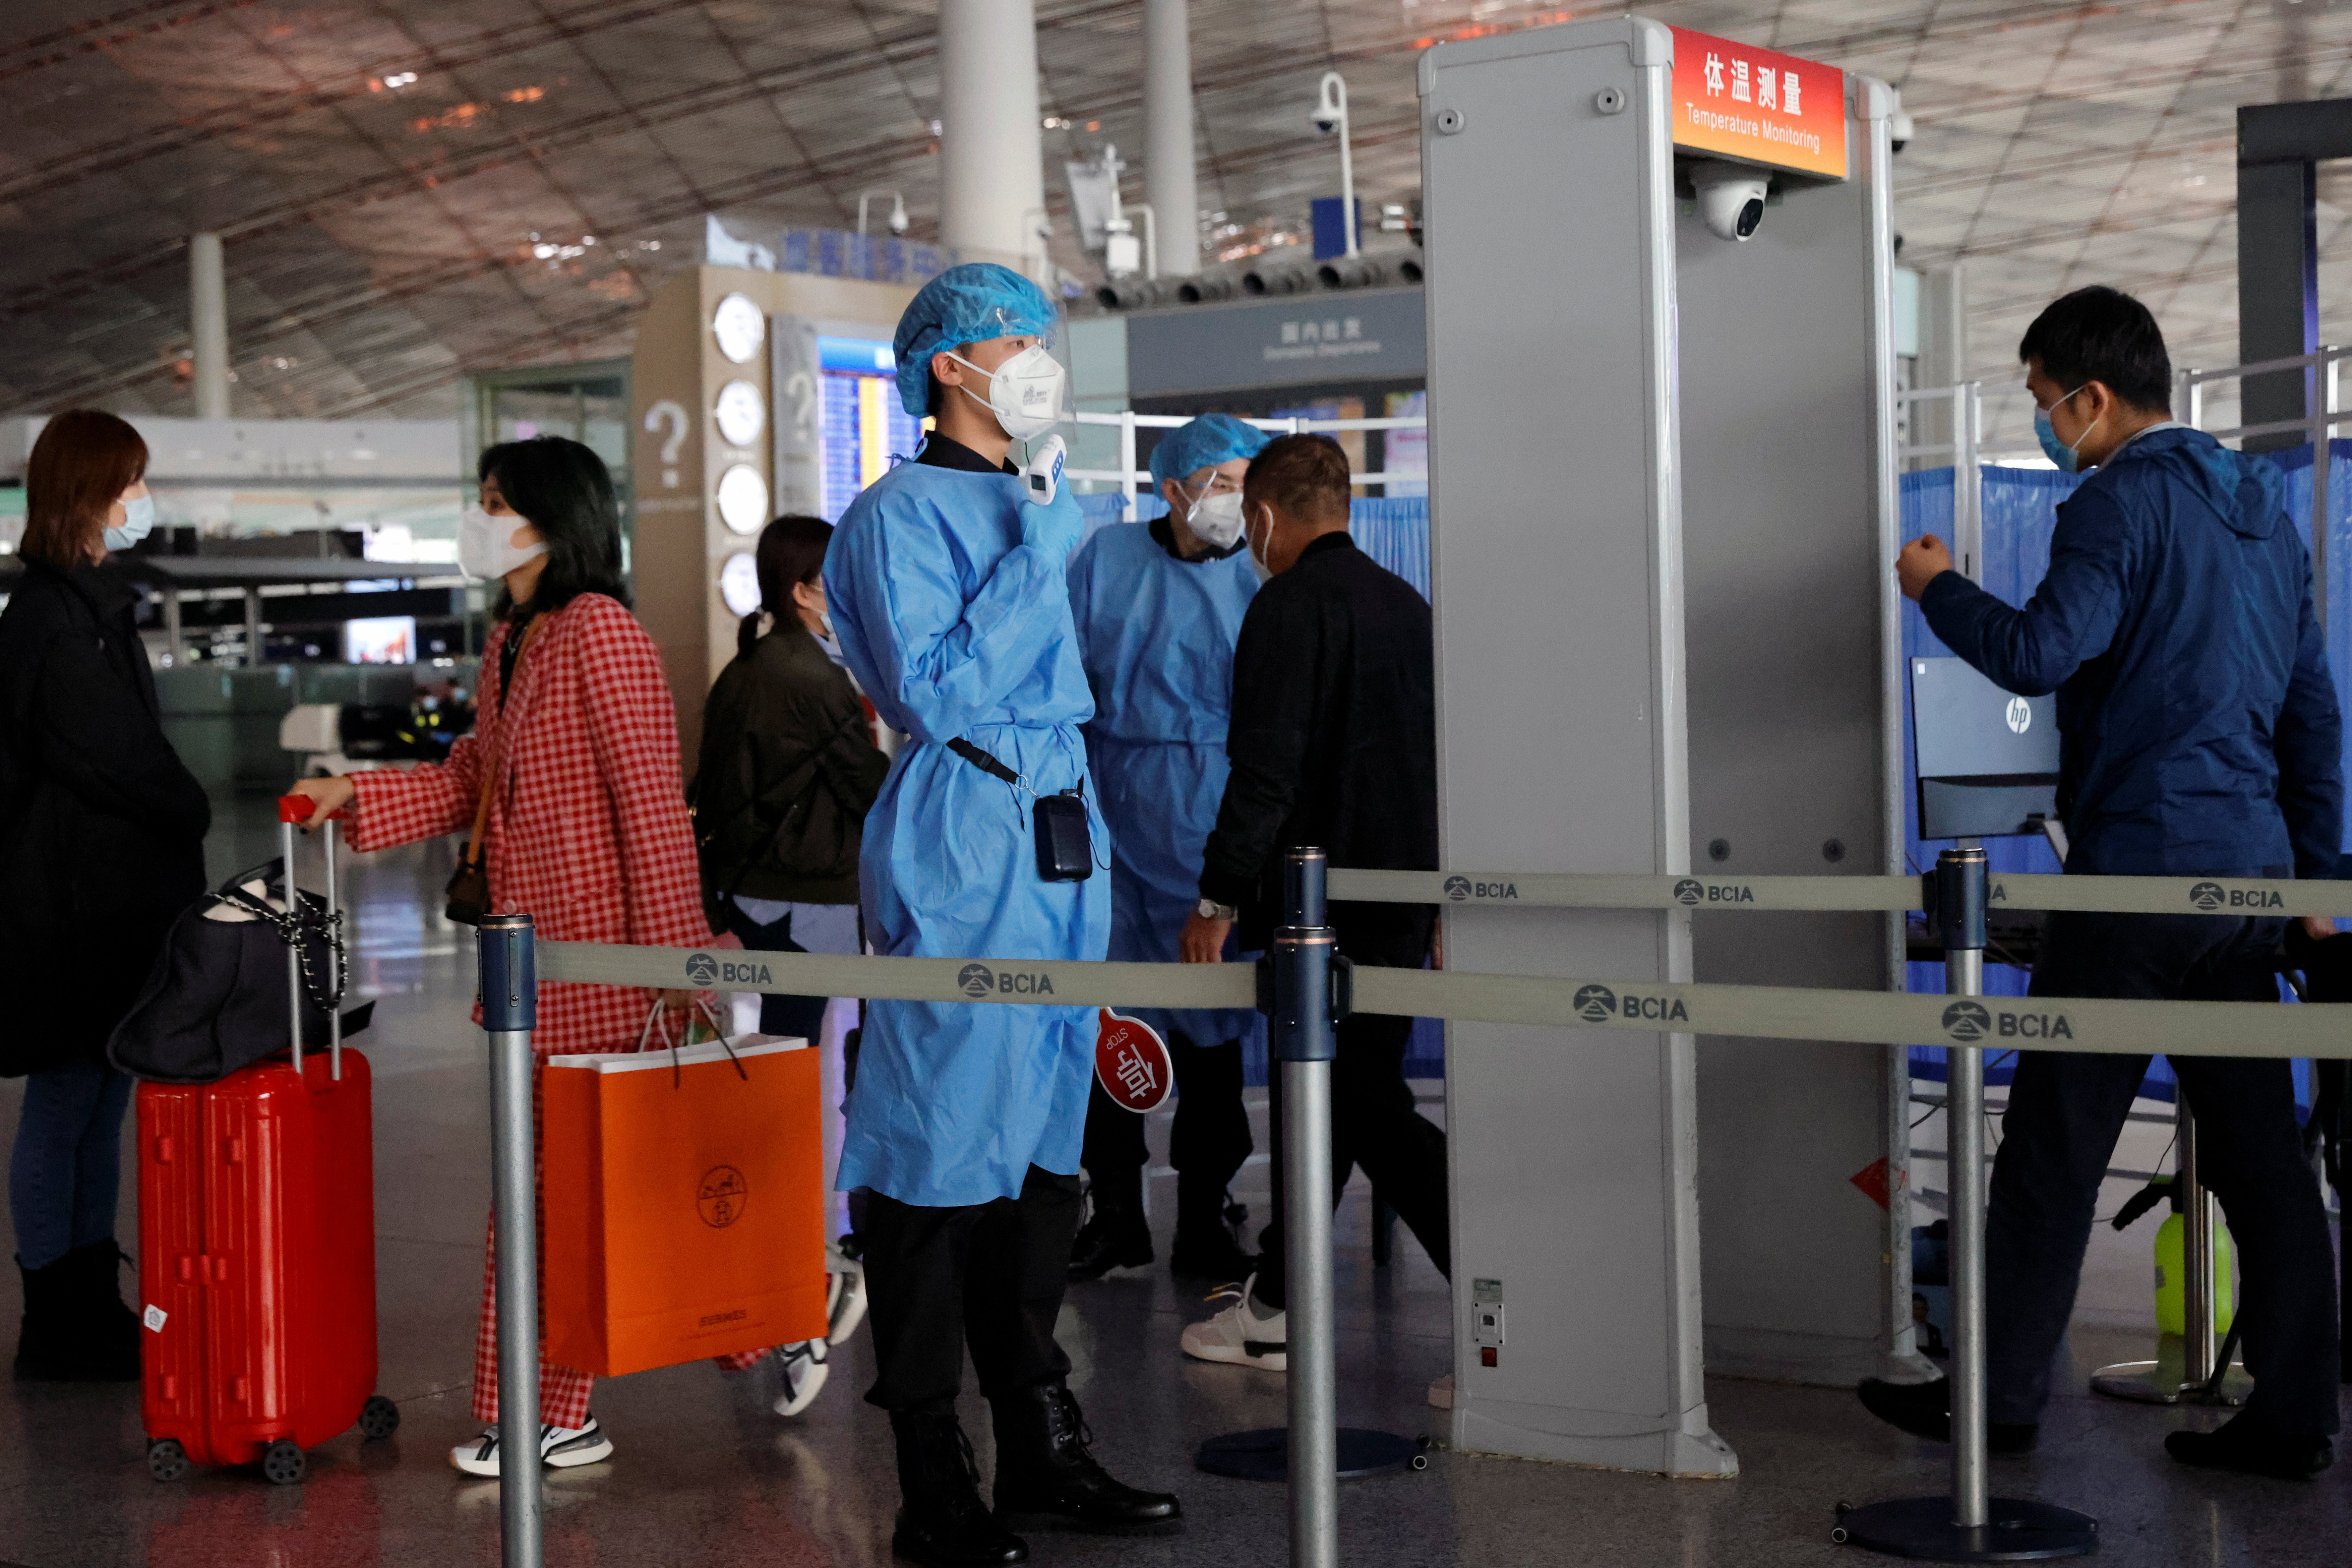 Medical staff check people’s temperature as they enter Beijing’s international airport on November 5, 2020. Photo: Reuters